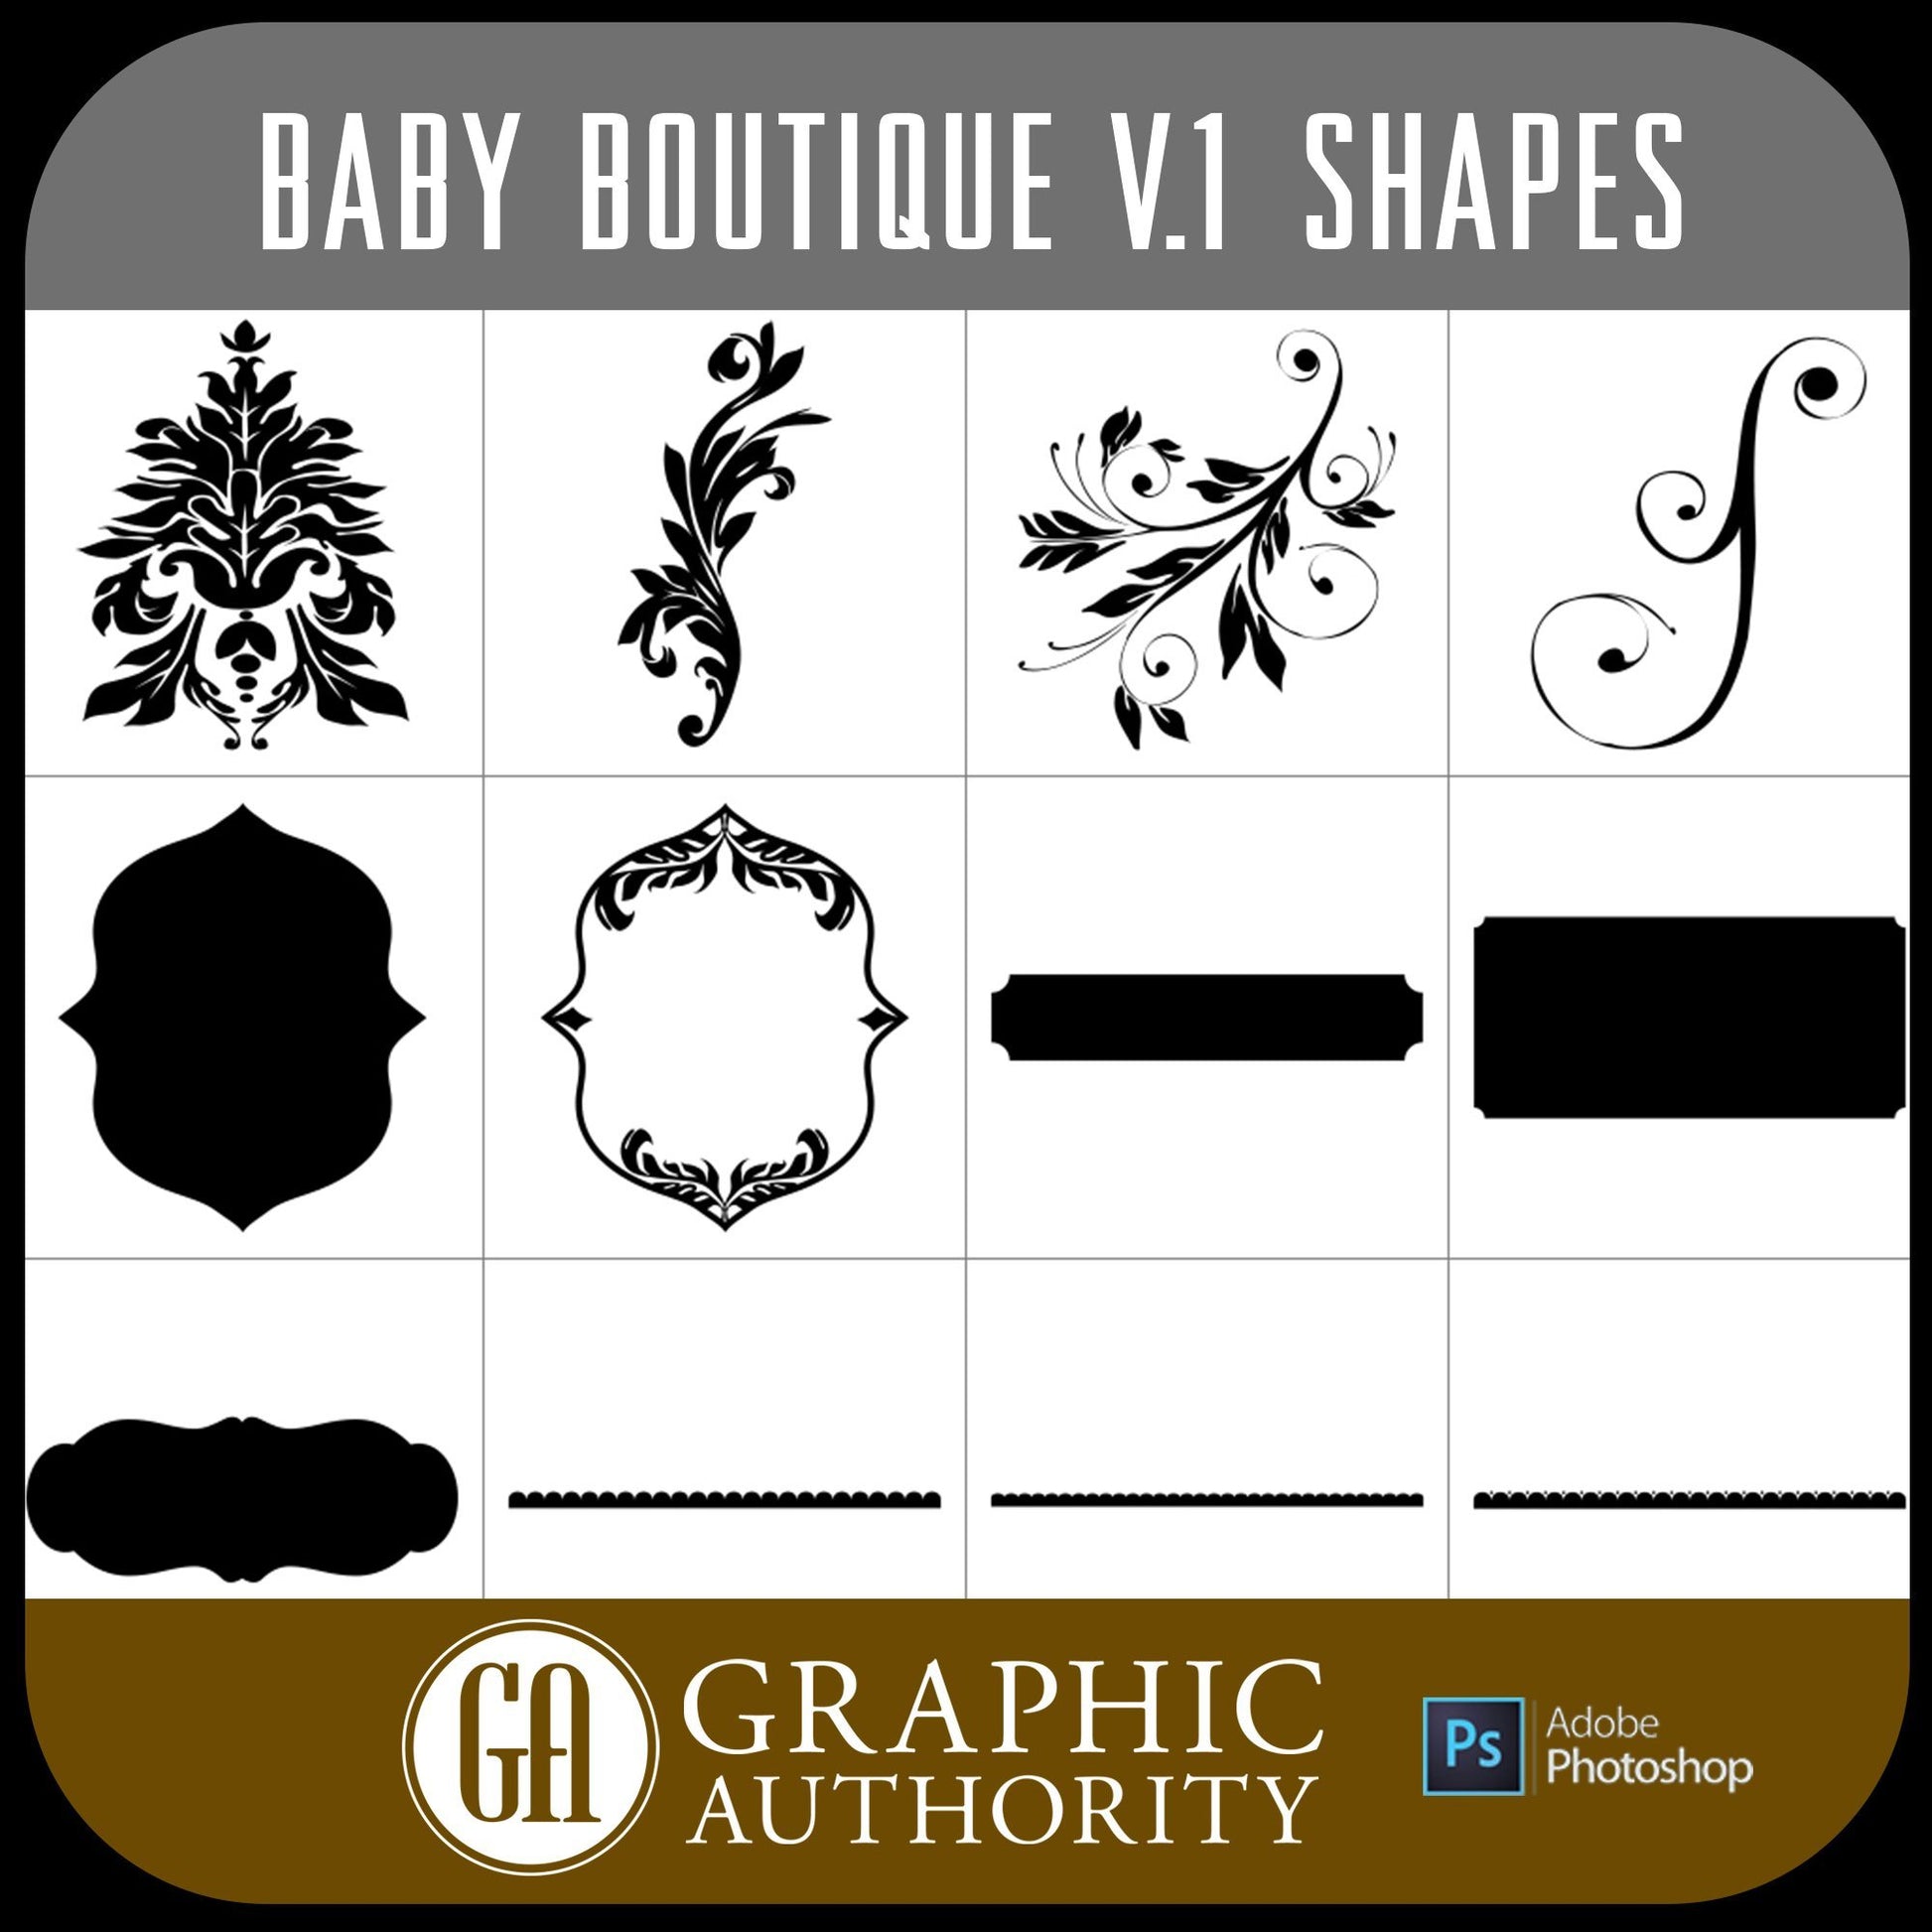 Baby Boutique V.1 - Vector .CHS Photoshop Shapes-Photoshop Template - Graphic Authority